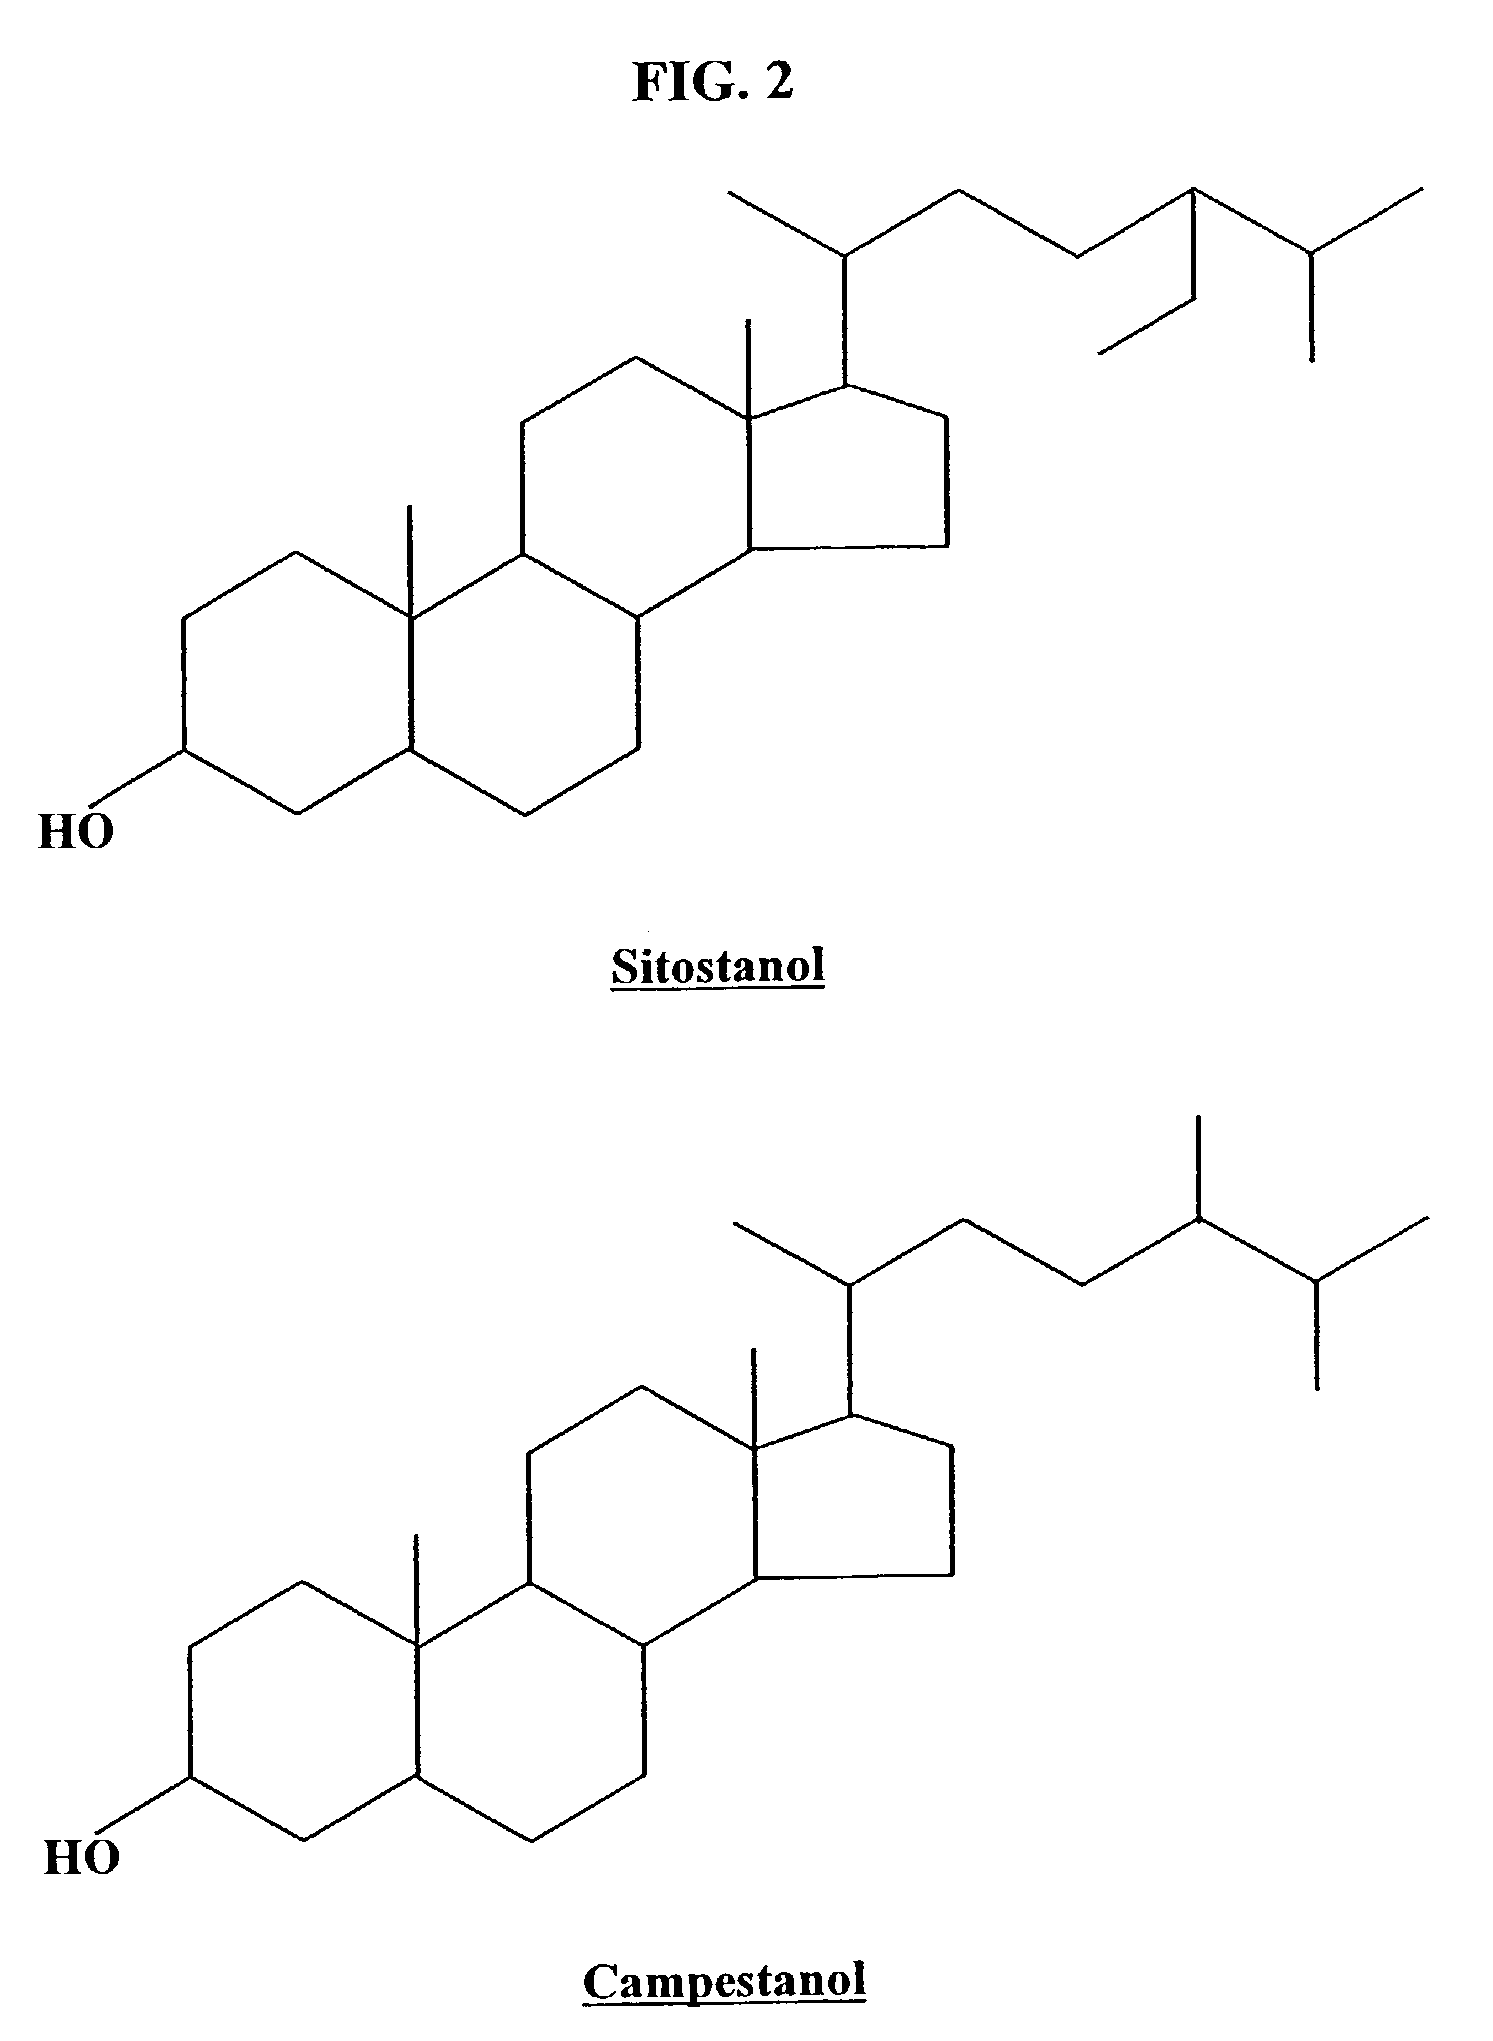 Method of reducing low density liproprotein cholesterol concentration